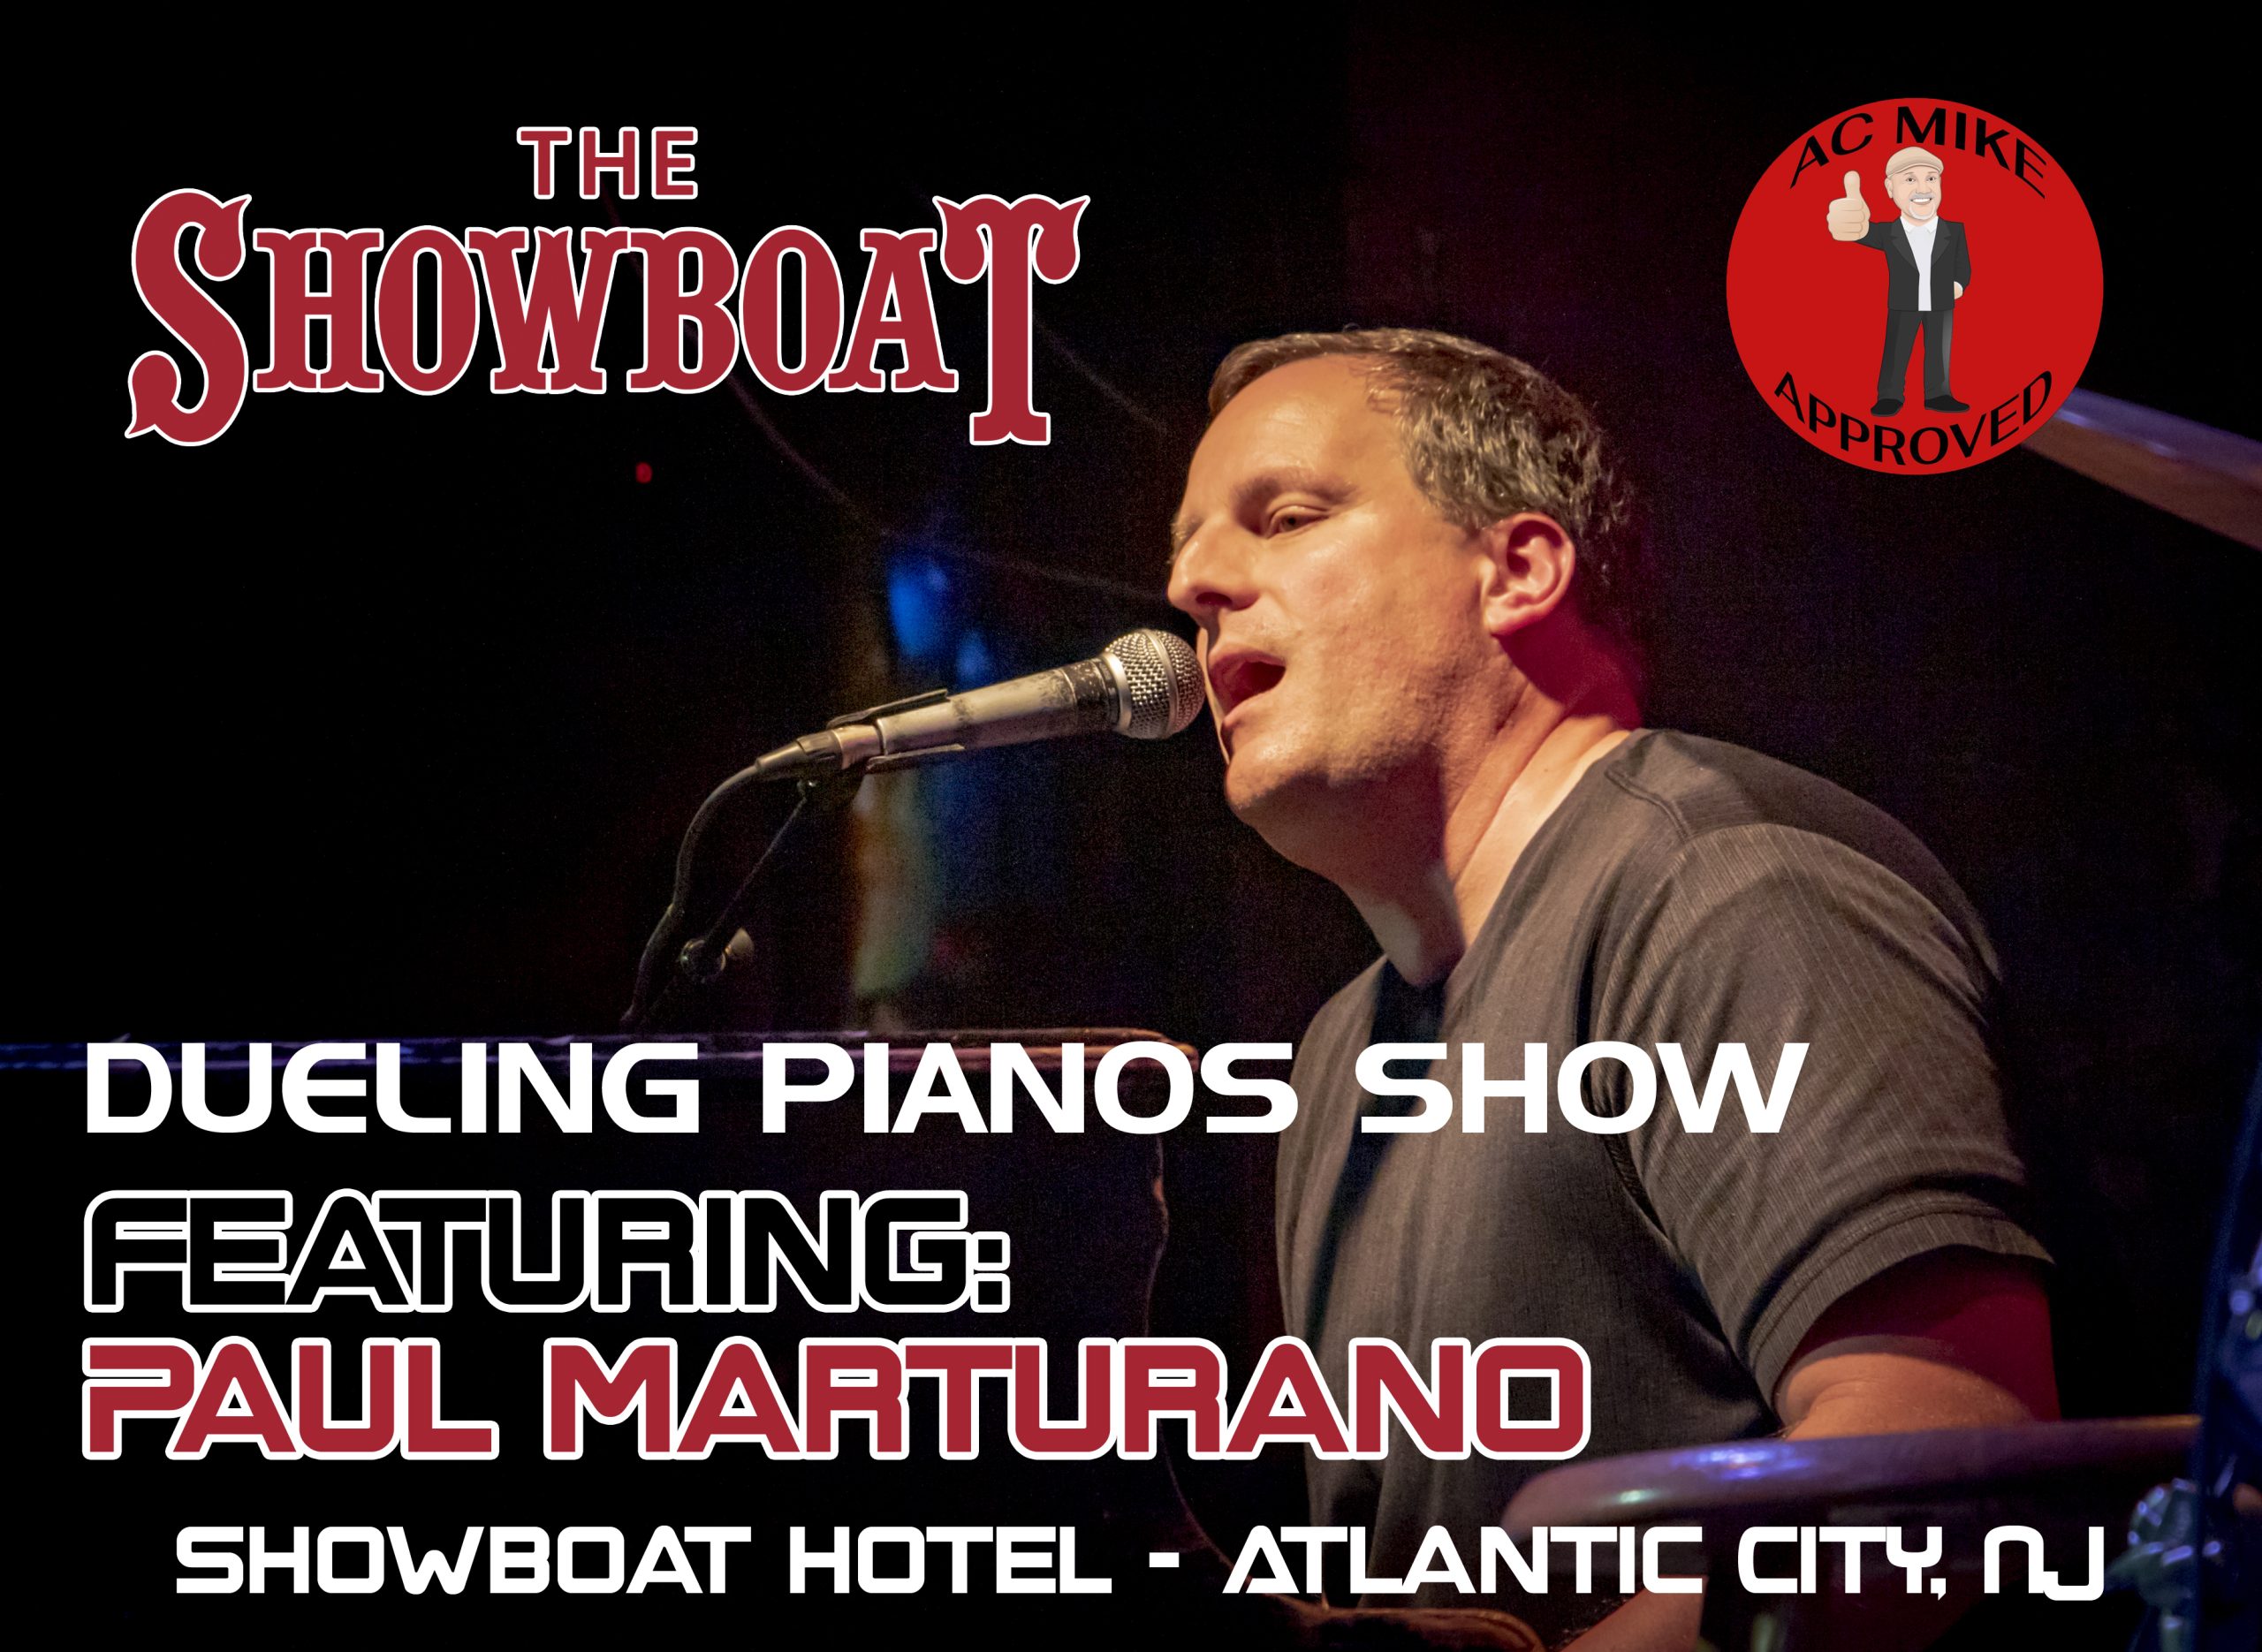 ac mike approved Showboat featuring Paul